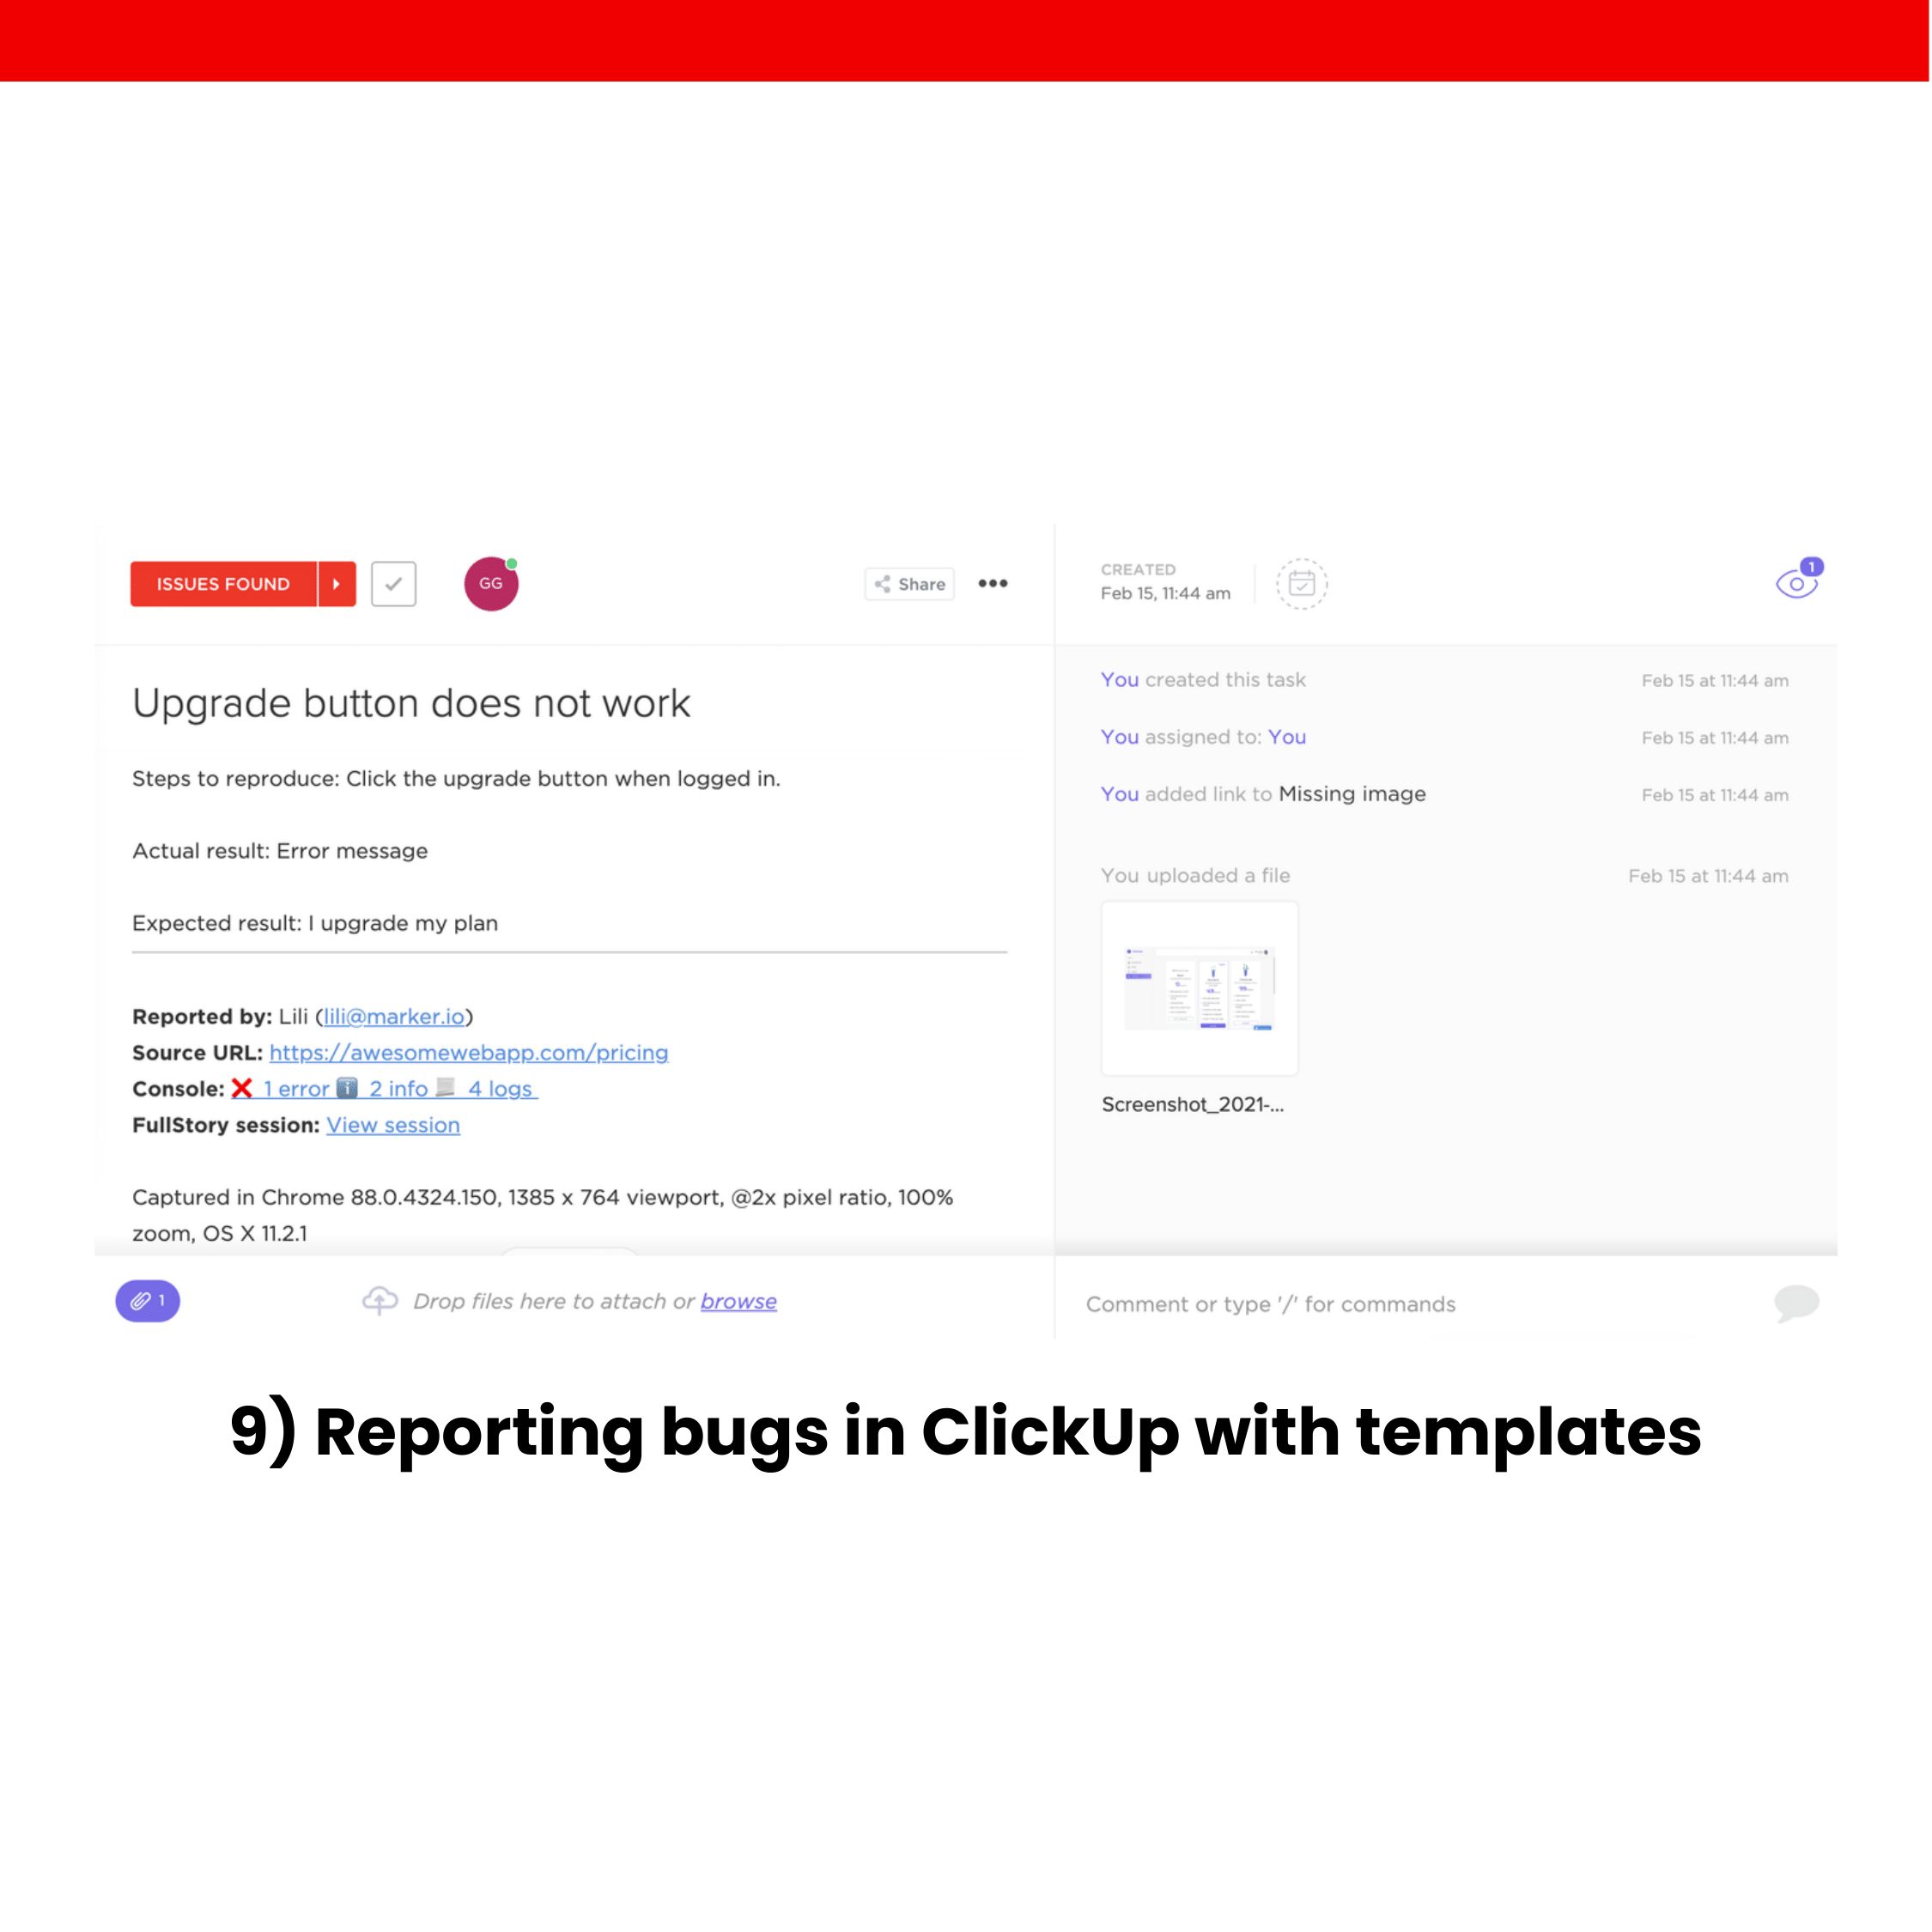 9) Reporting bugs in ClickUp with templates